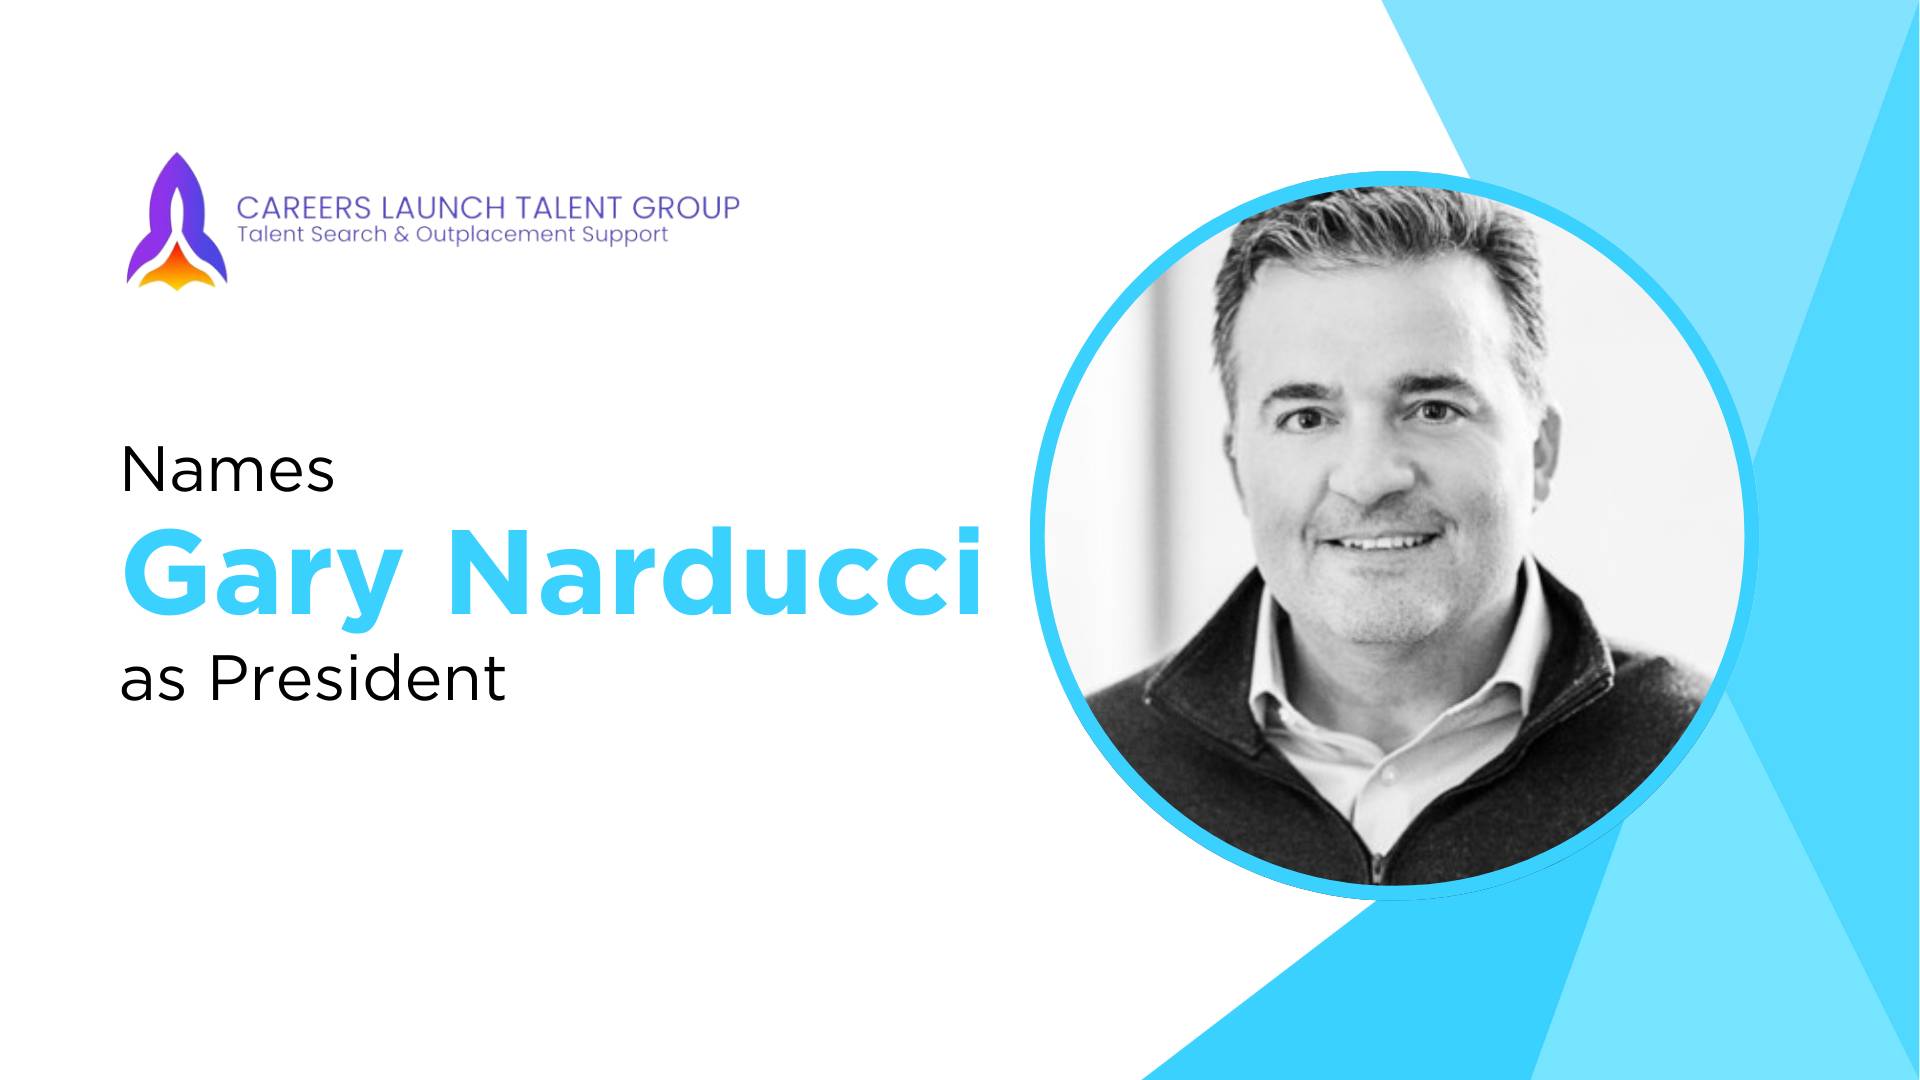 "Gary Narducci Joins Careers Launch Talent Group as President of Outplacement Services"